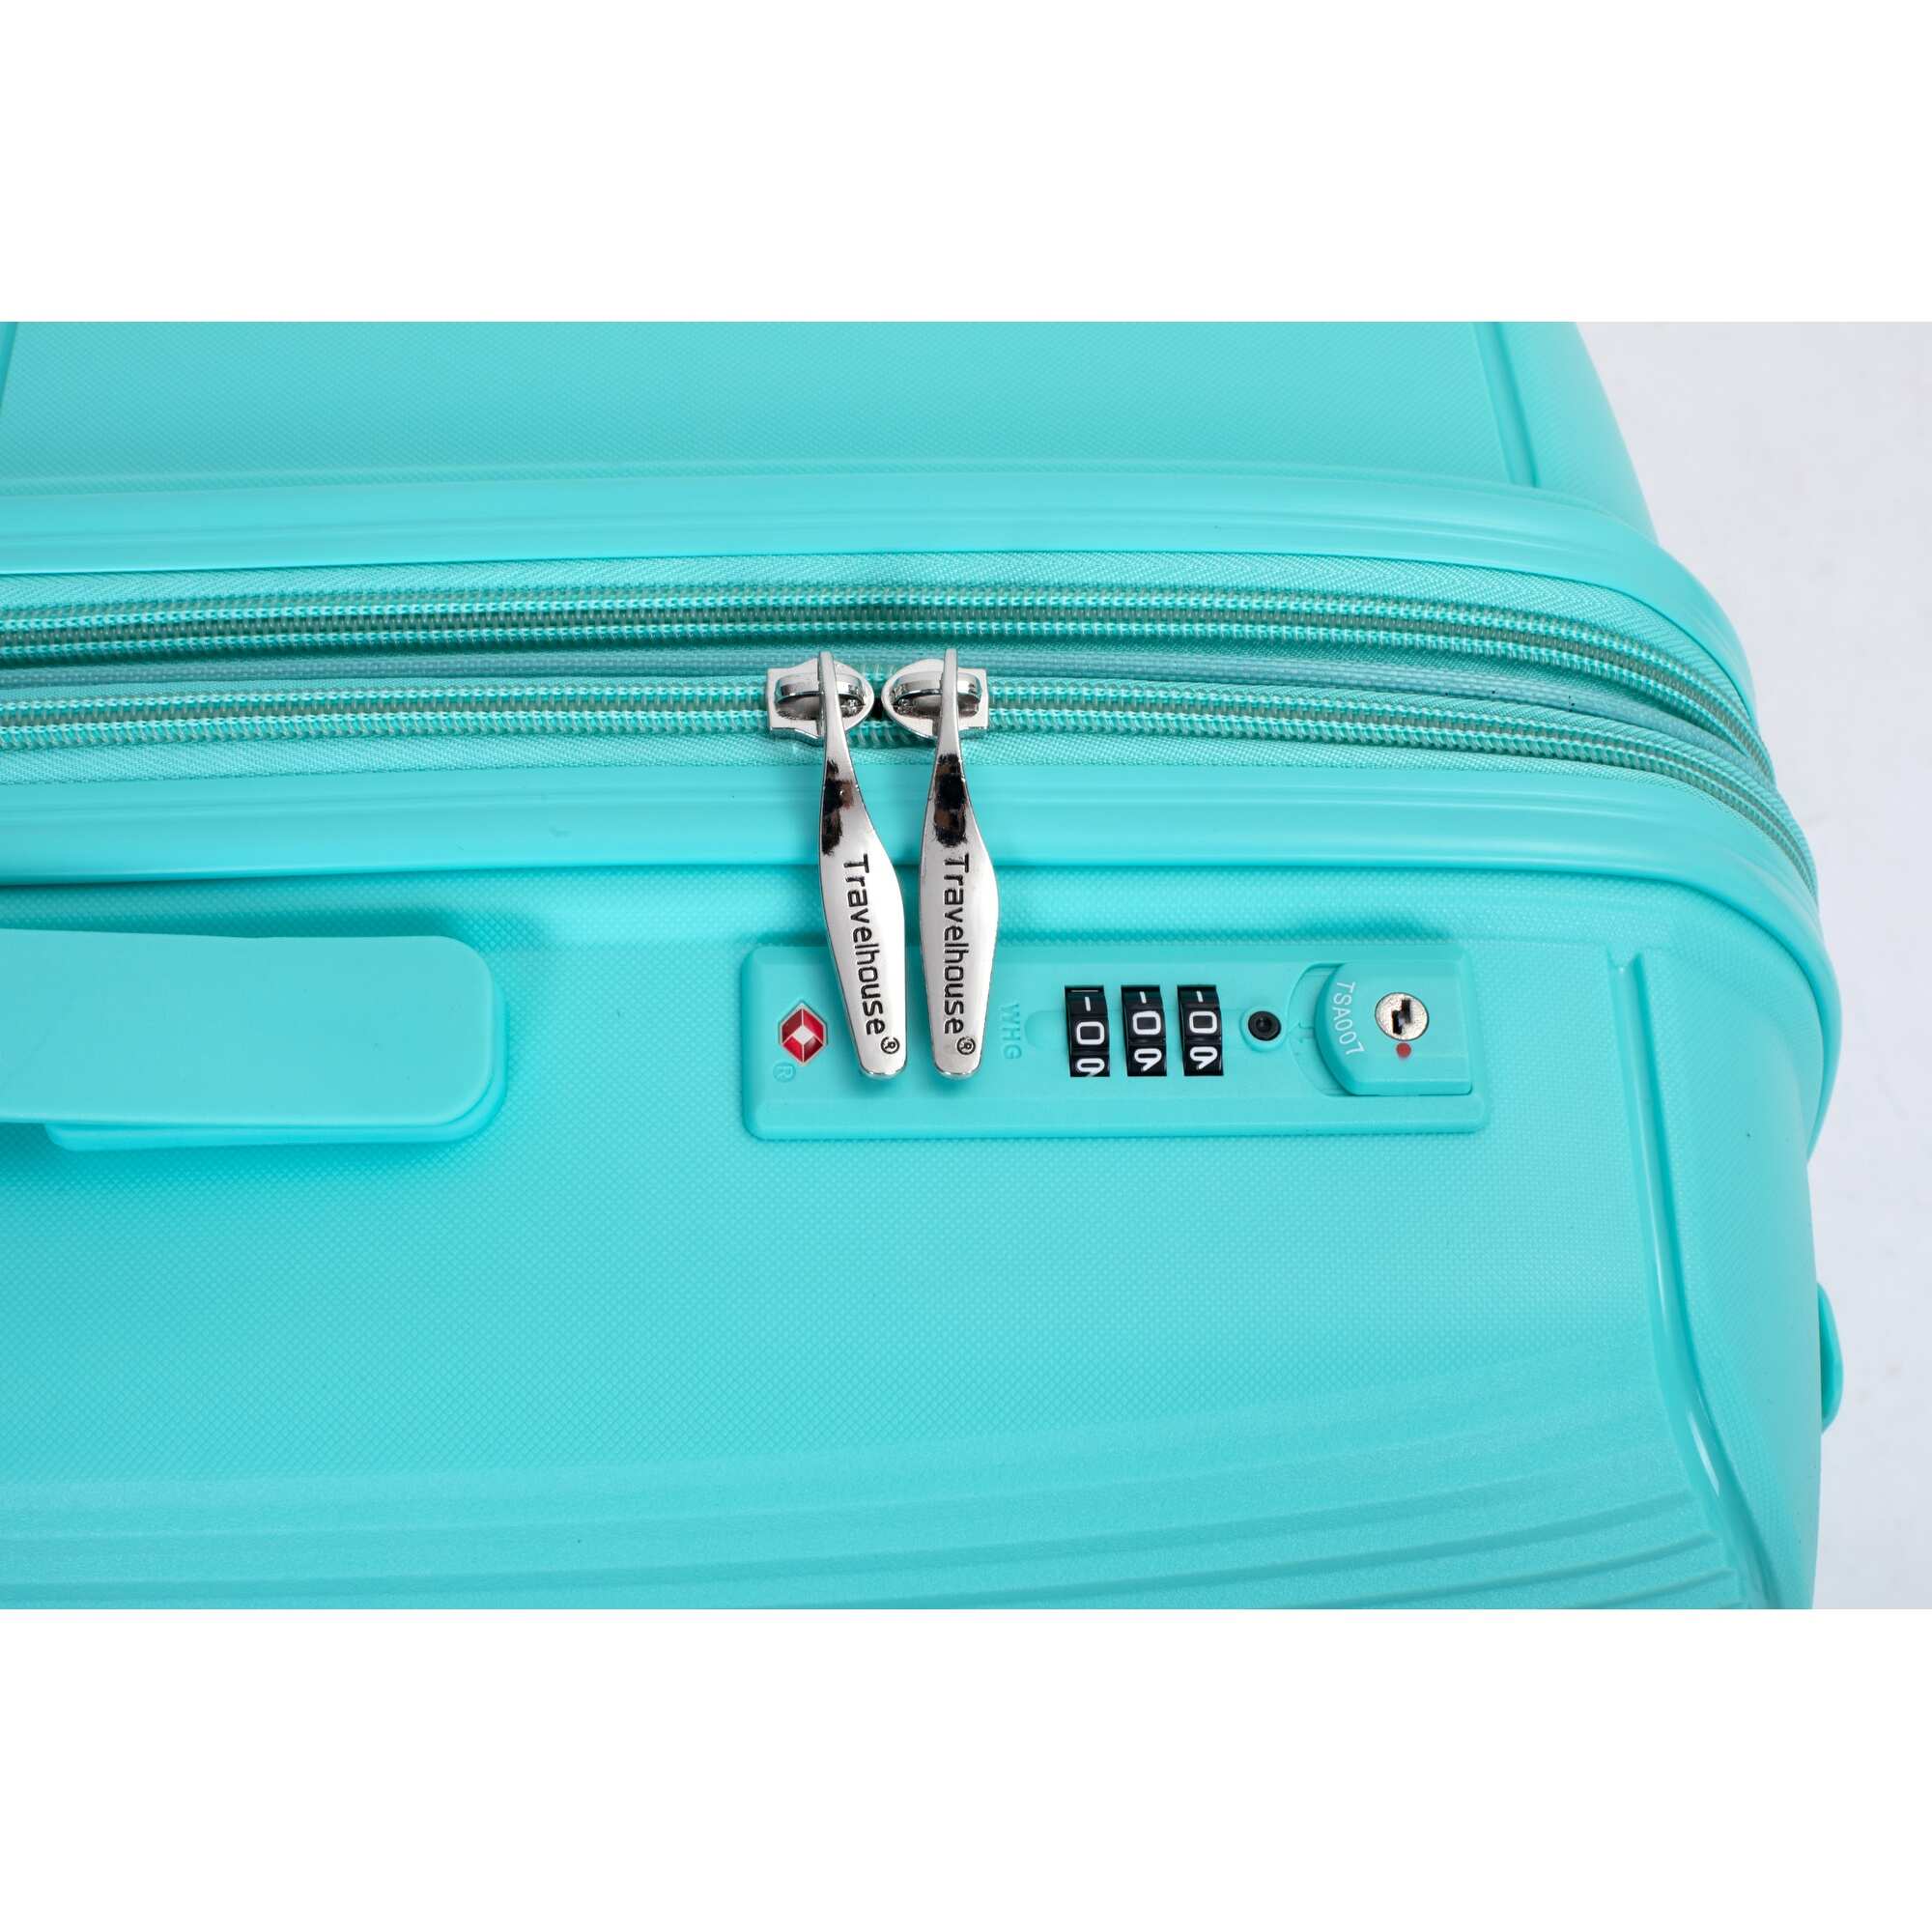 3-Piece Set Trunk Sets Suitcase with TSA Lock and Adjustable Telescoping Handle Travel Suitcase Sets 20"/24"/28", Lake Blue